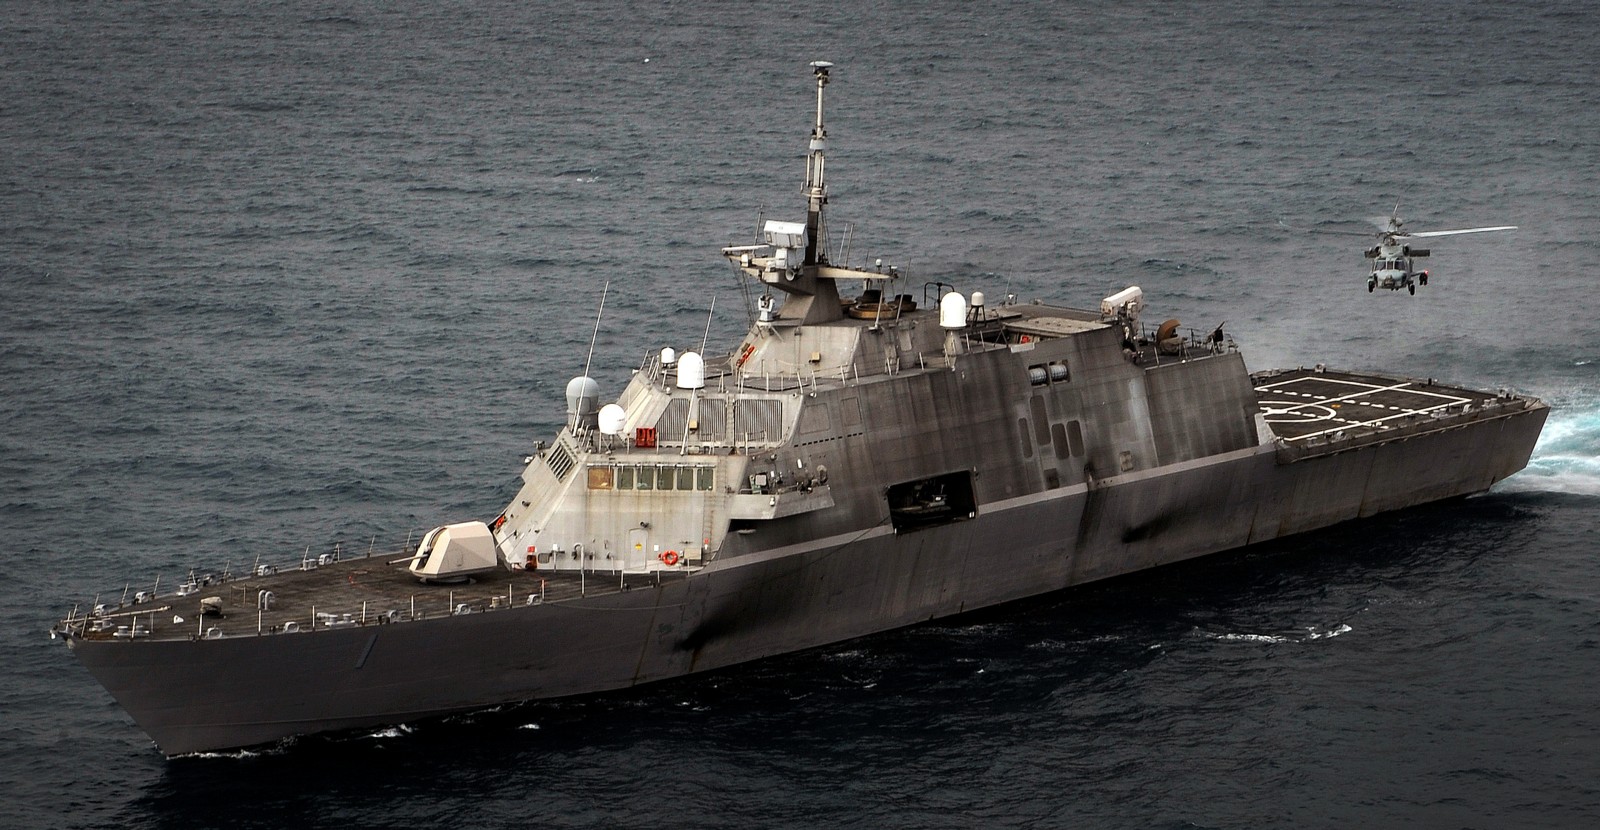 lcs-1 uss freedom class littoral combat ship us navy 66